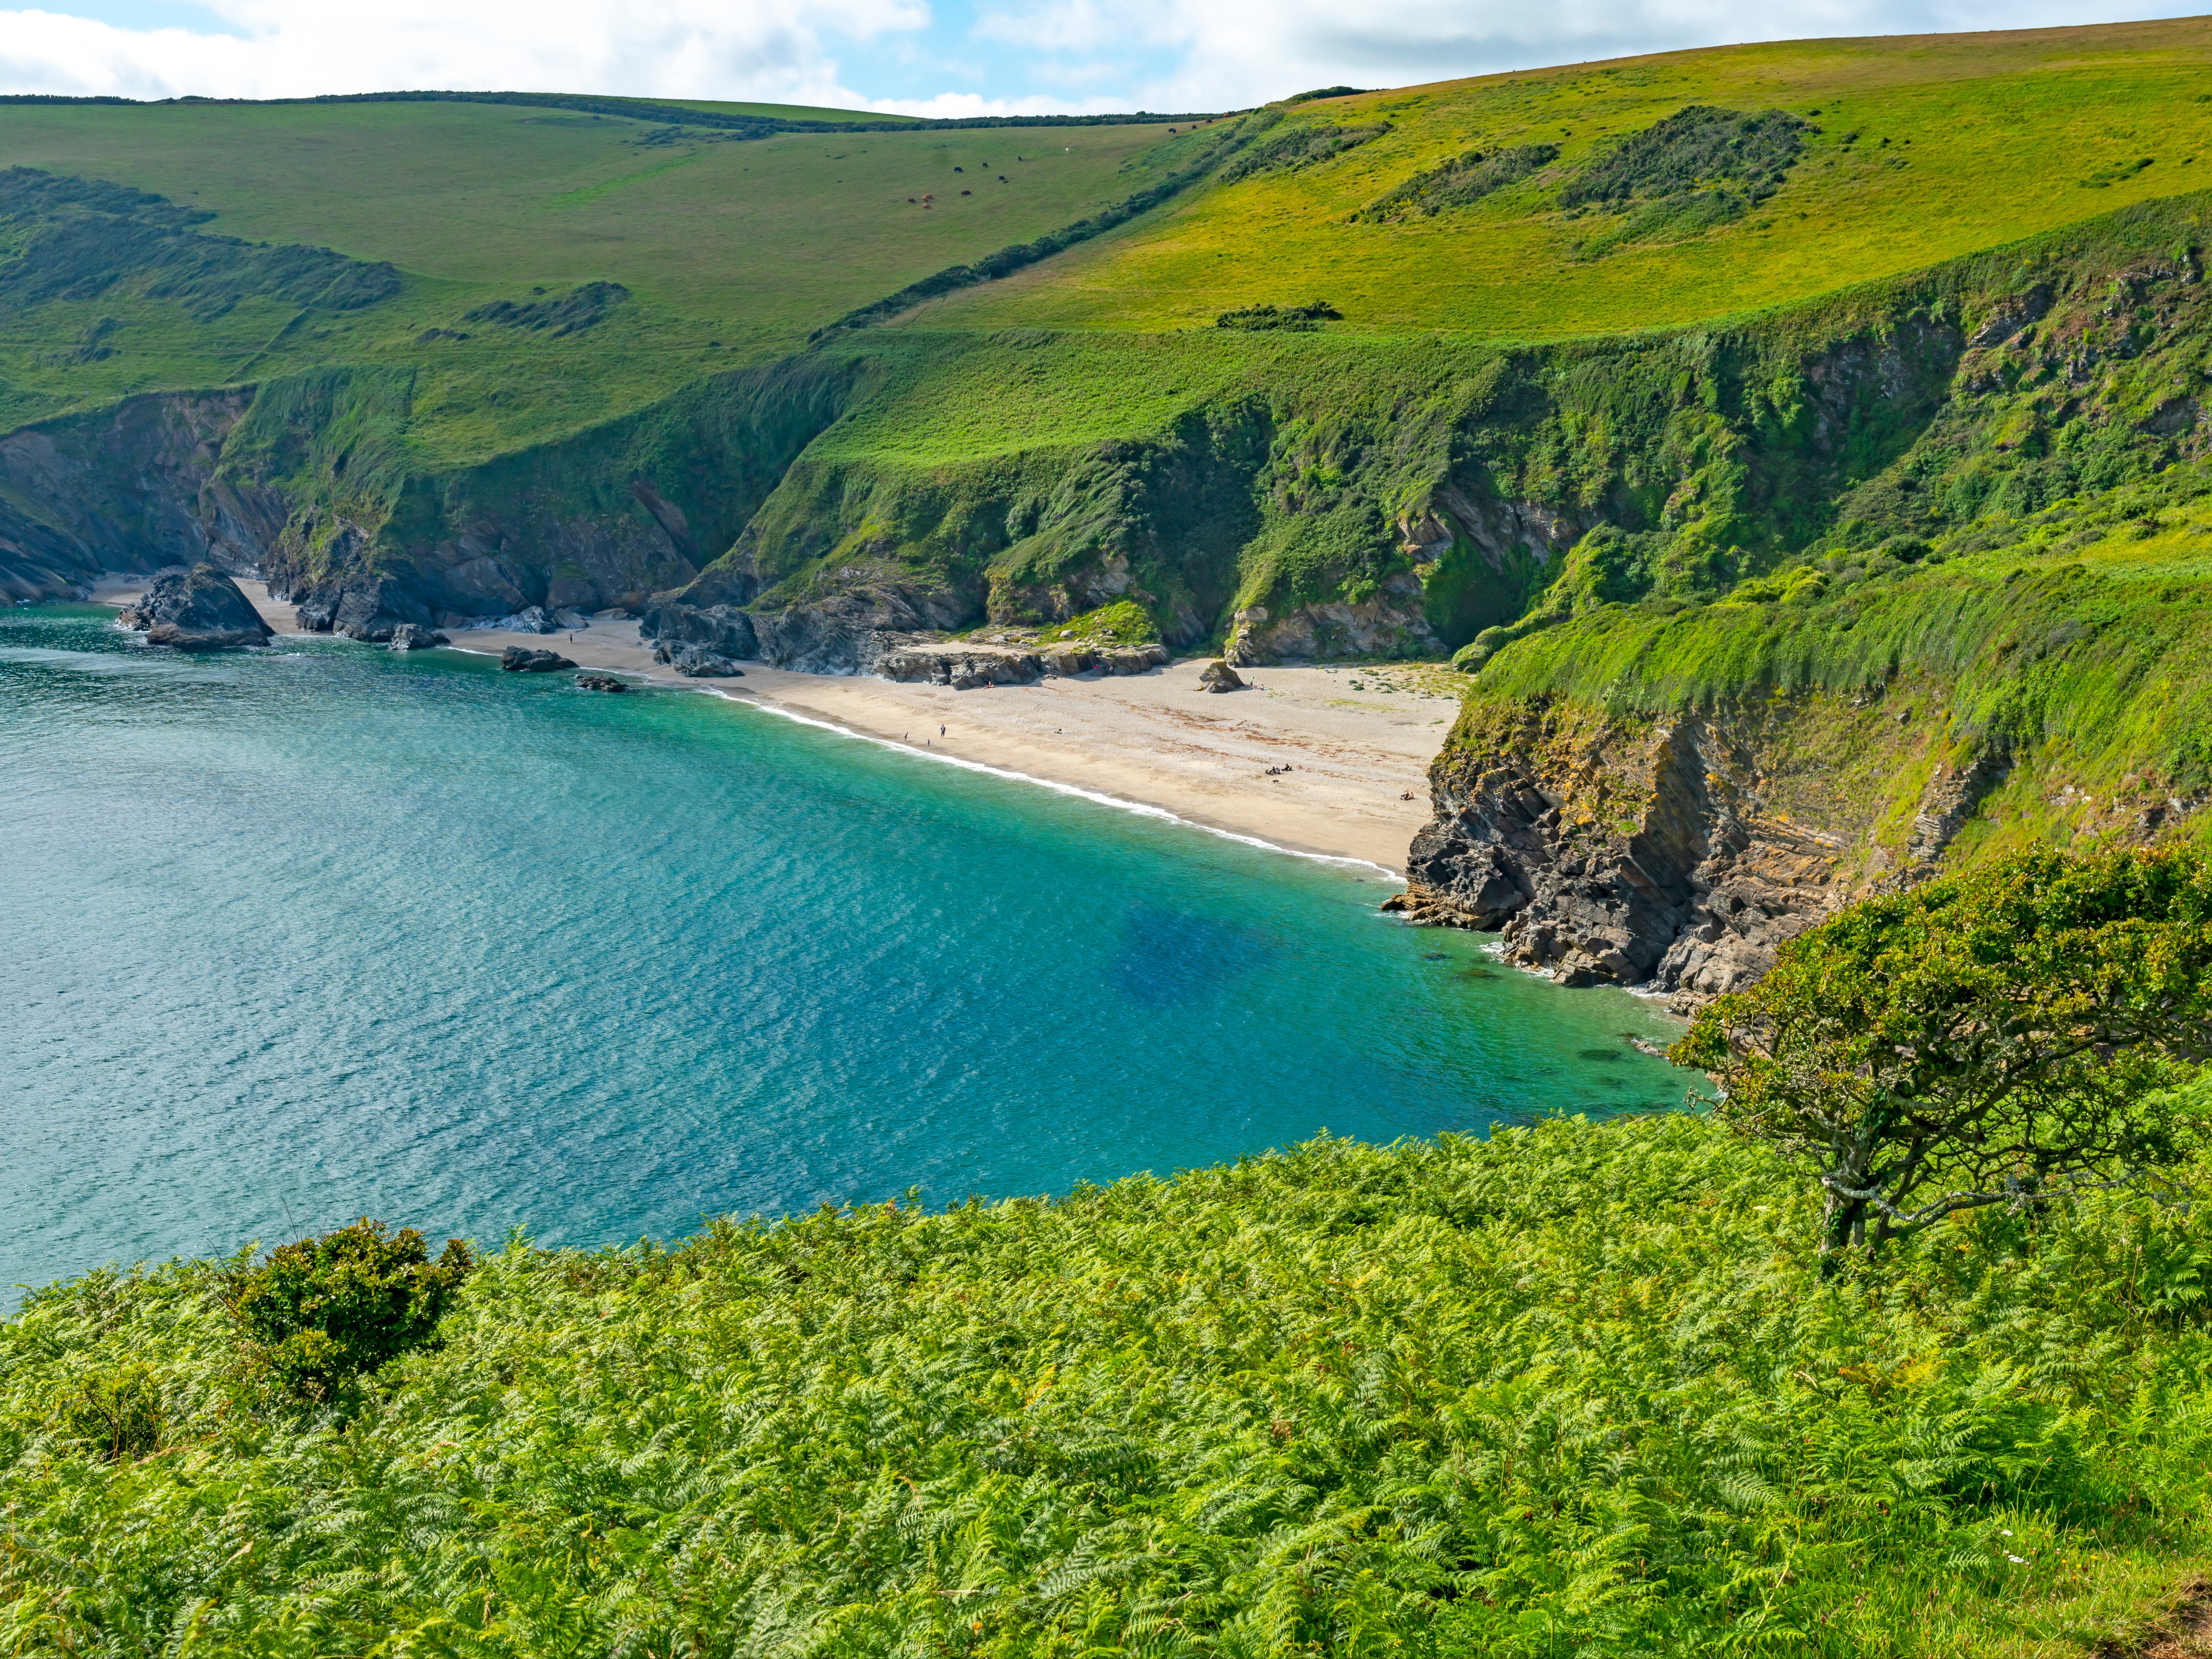 Come prepared for a hike down some uneven steps and a slope to reach this secret beach